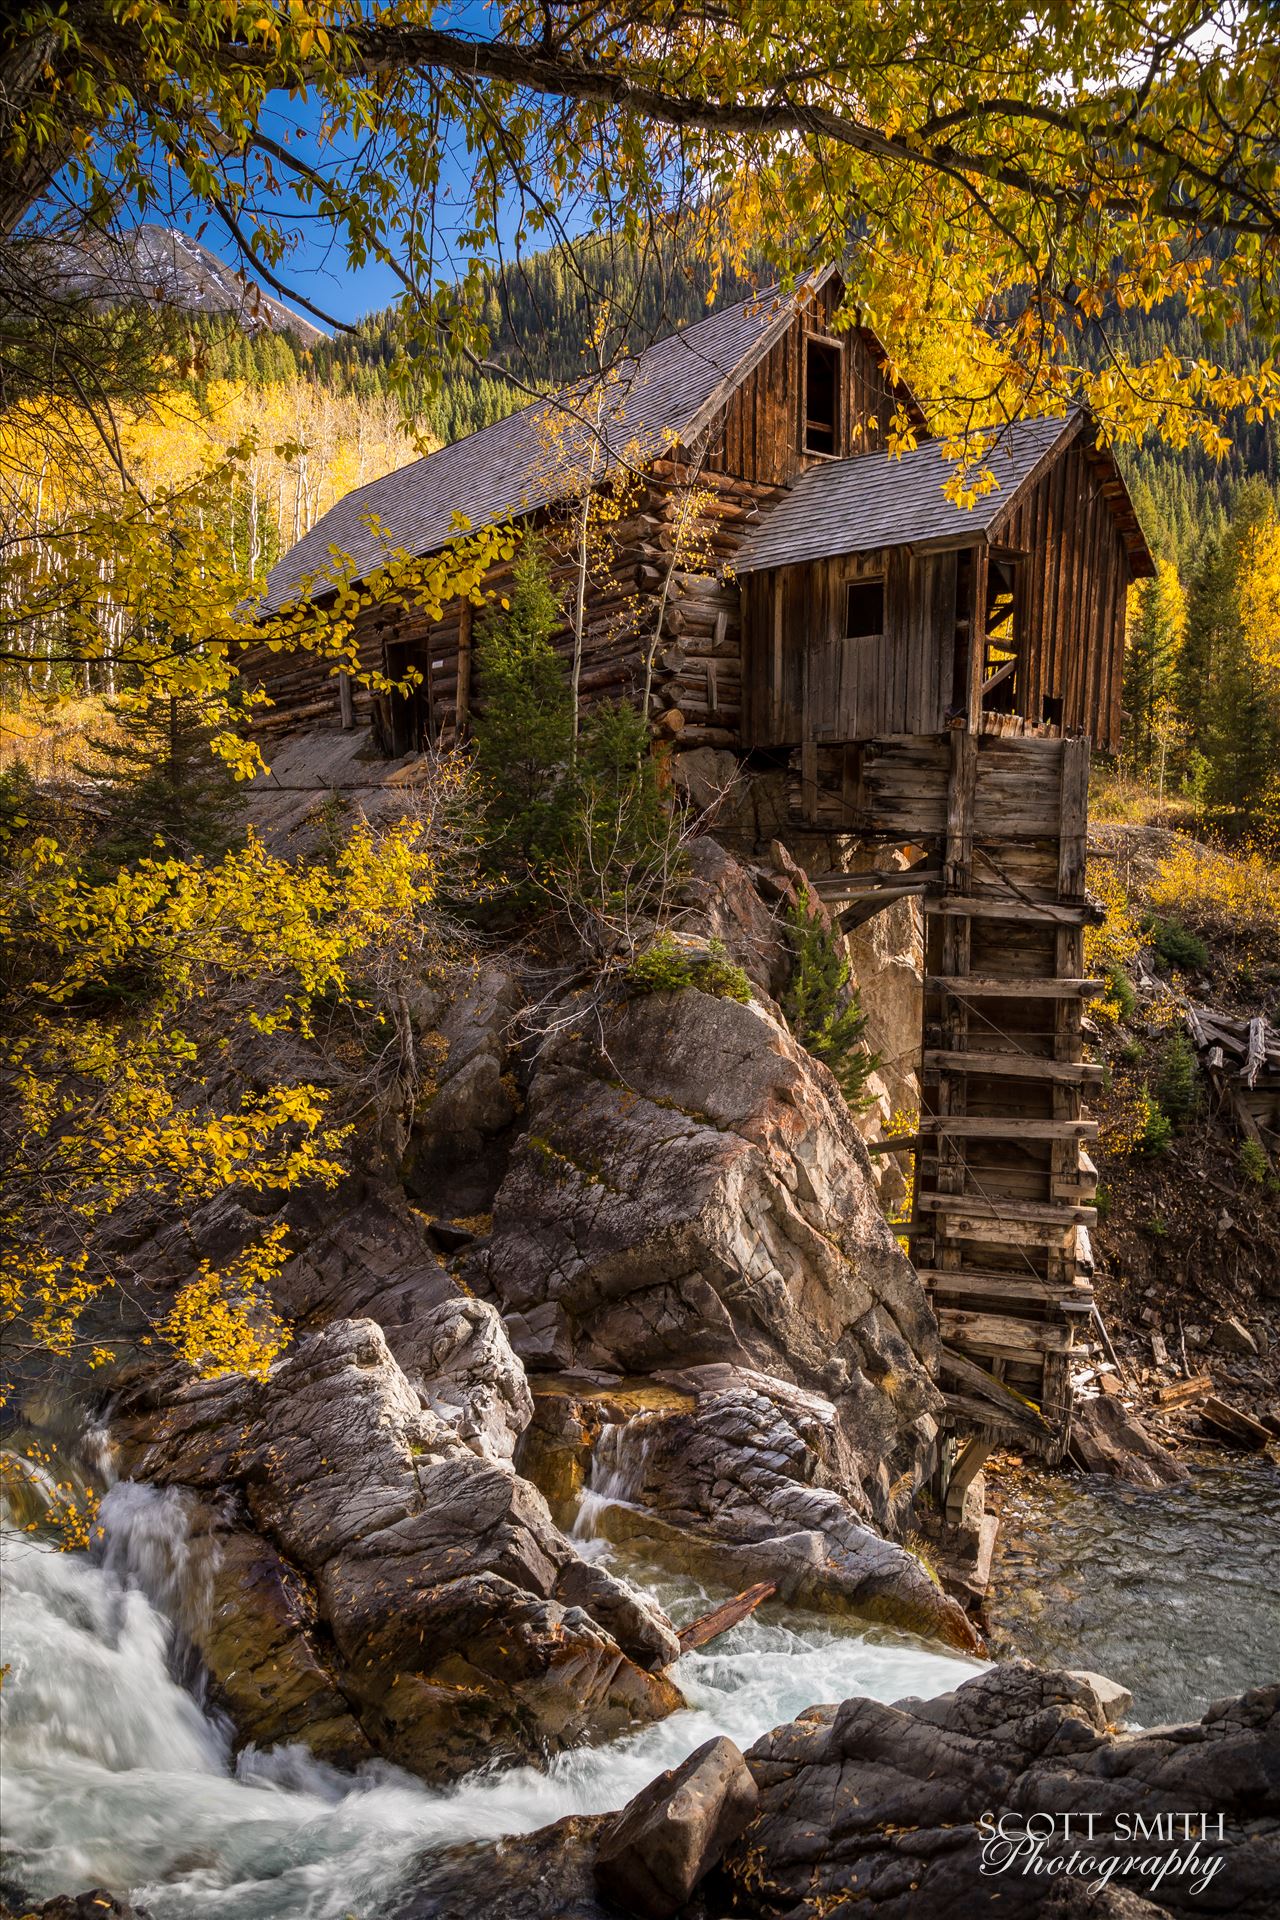 Crystal Mill No 2 - The Crystal Mill, or the Old Mill is an 1892 wooden powerhouse located on an outcrop above the Crystal River in Crystal, Colorado by Scott Smith Photos